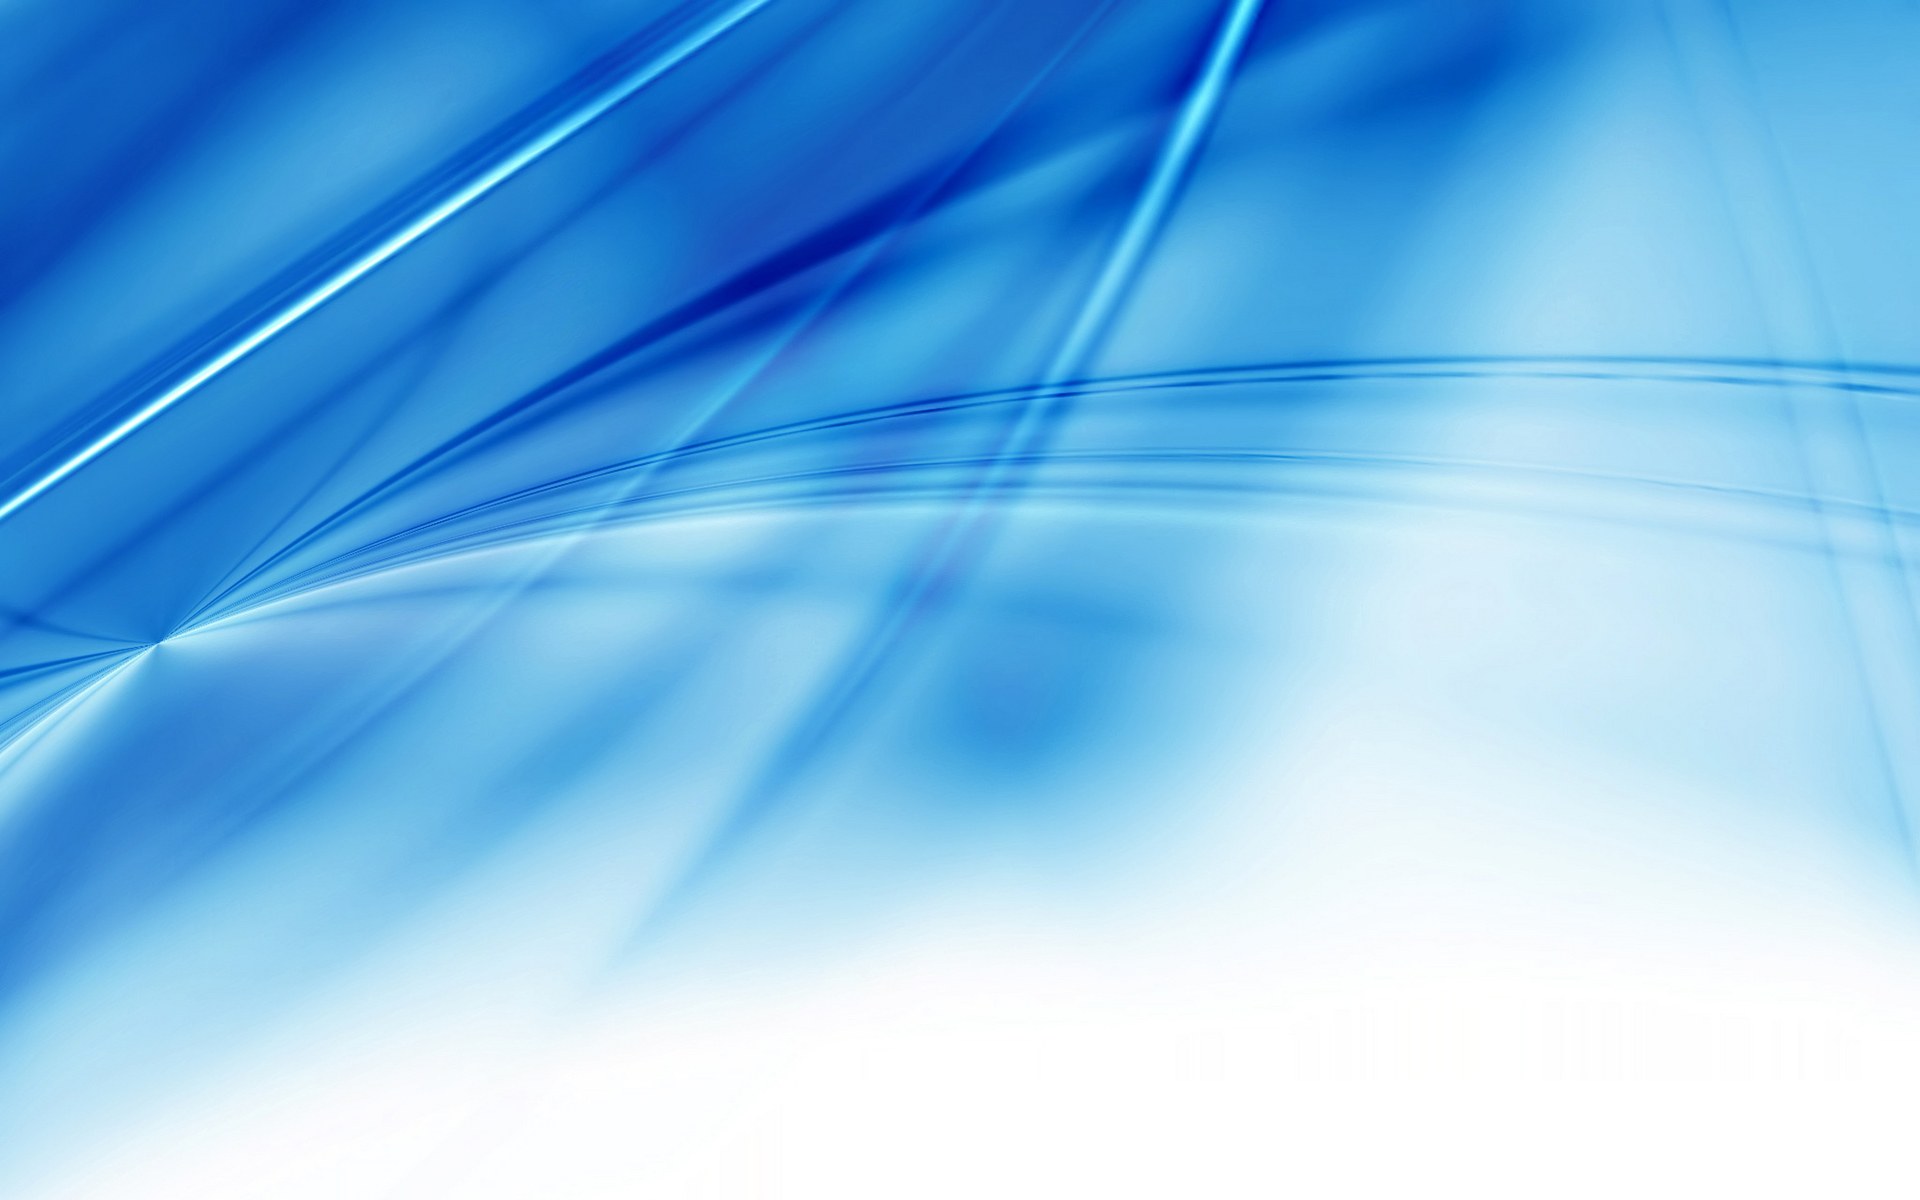 Blue Abstract Background 3158 Hd Wallpapers in Abstract   Imagescicom